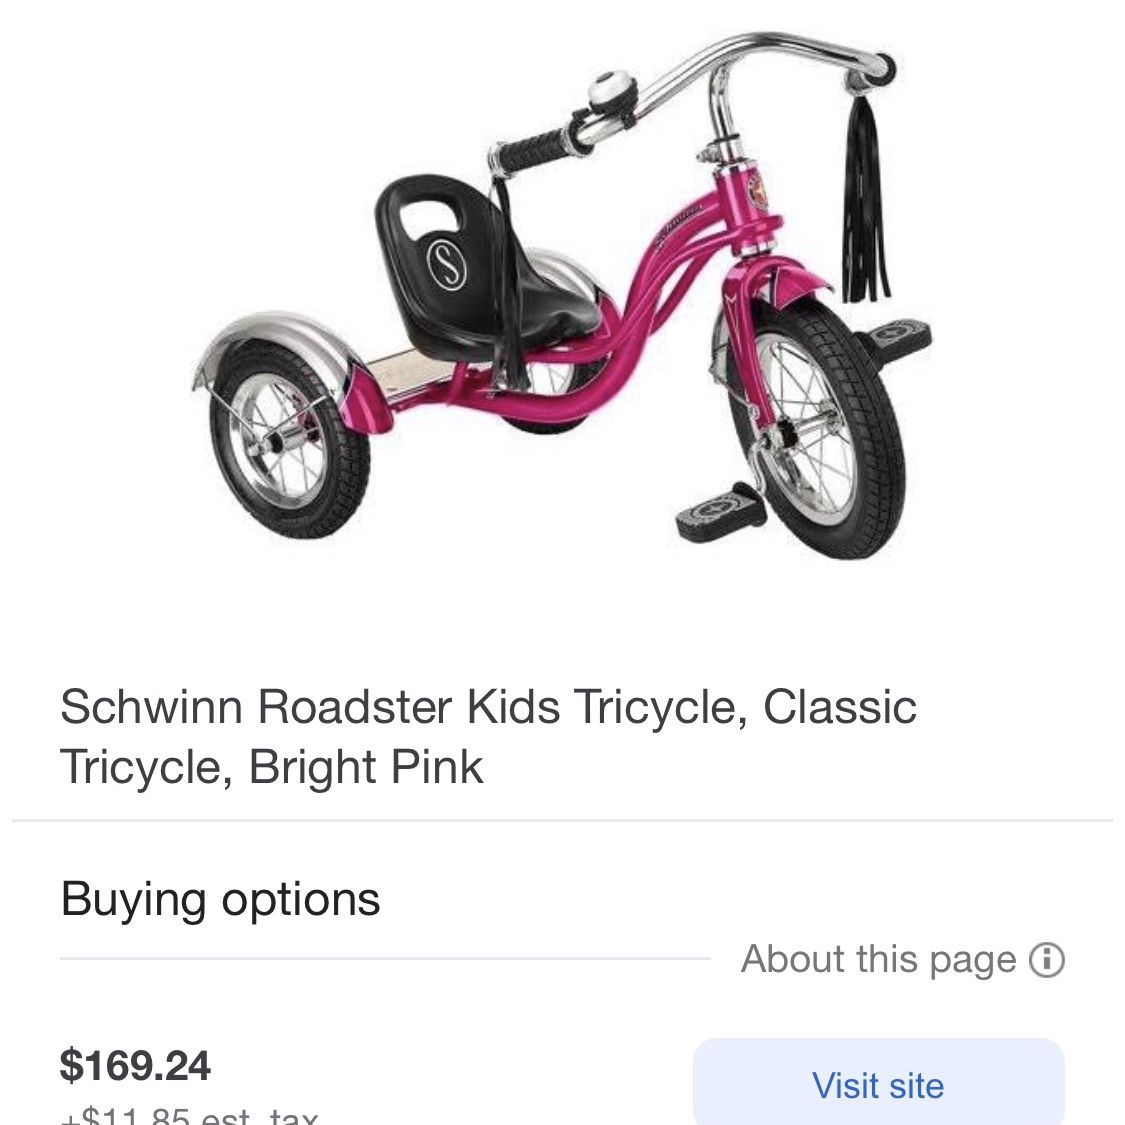 Schwinn Roadster Kids Tricycle, Classic Tricycle, Bright Pink